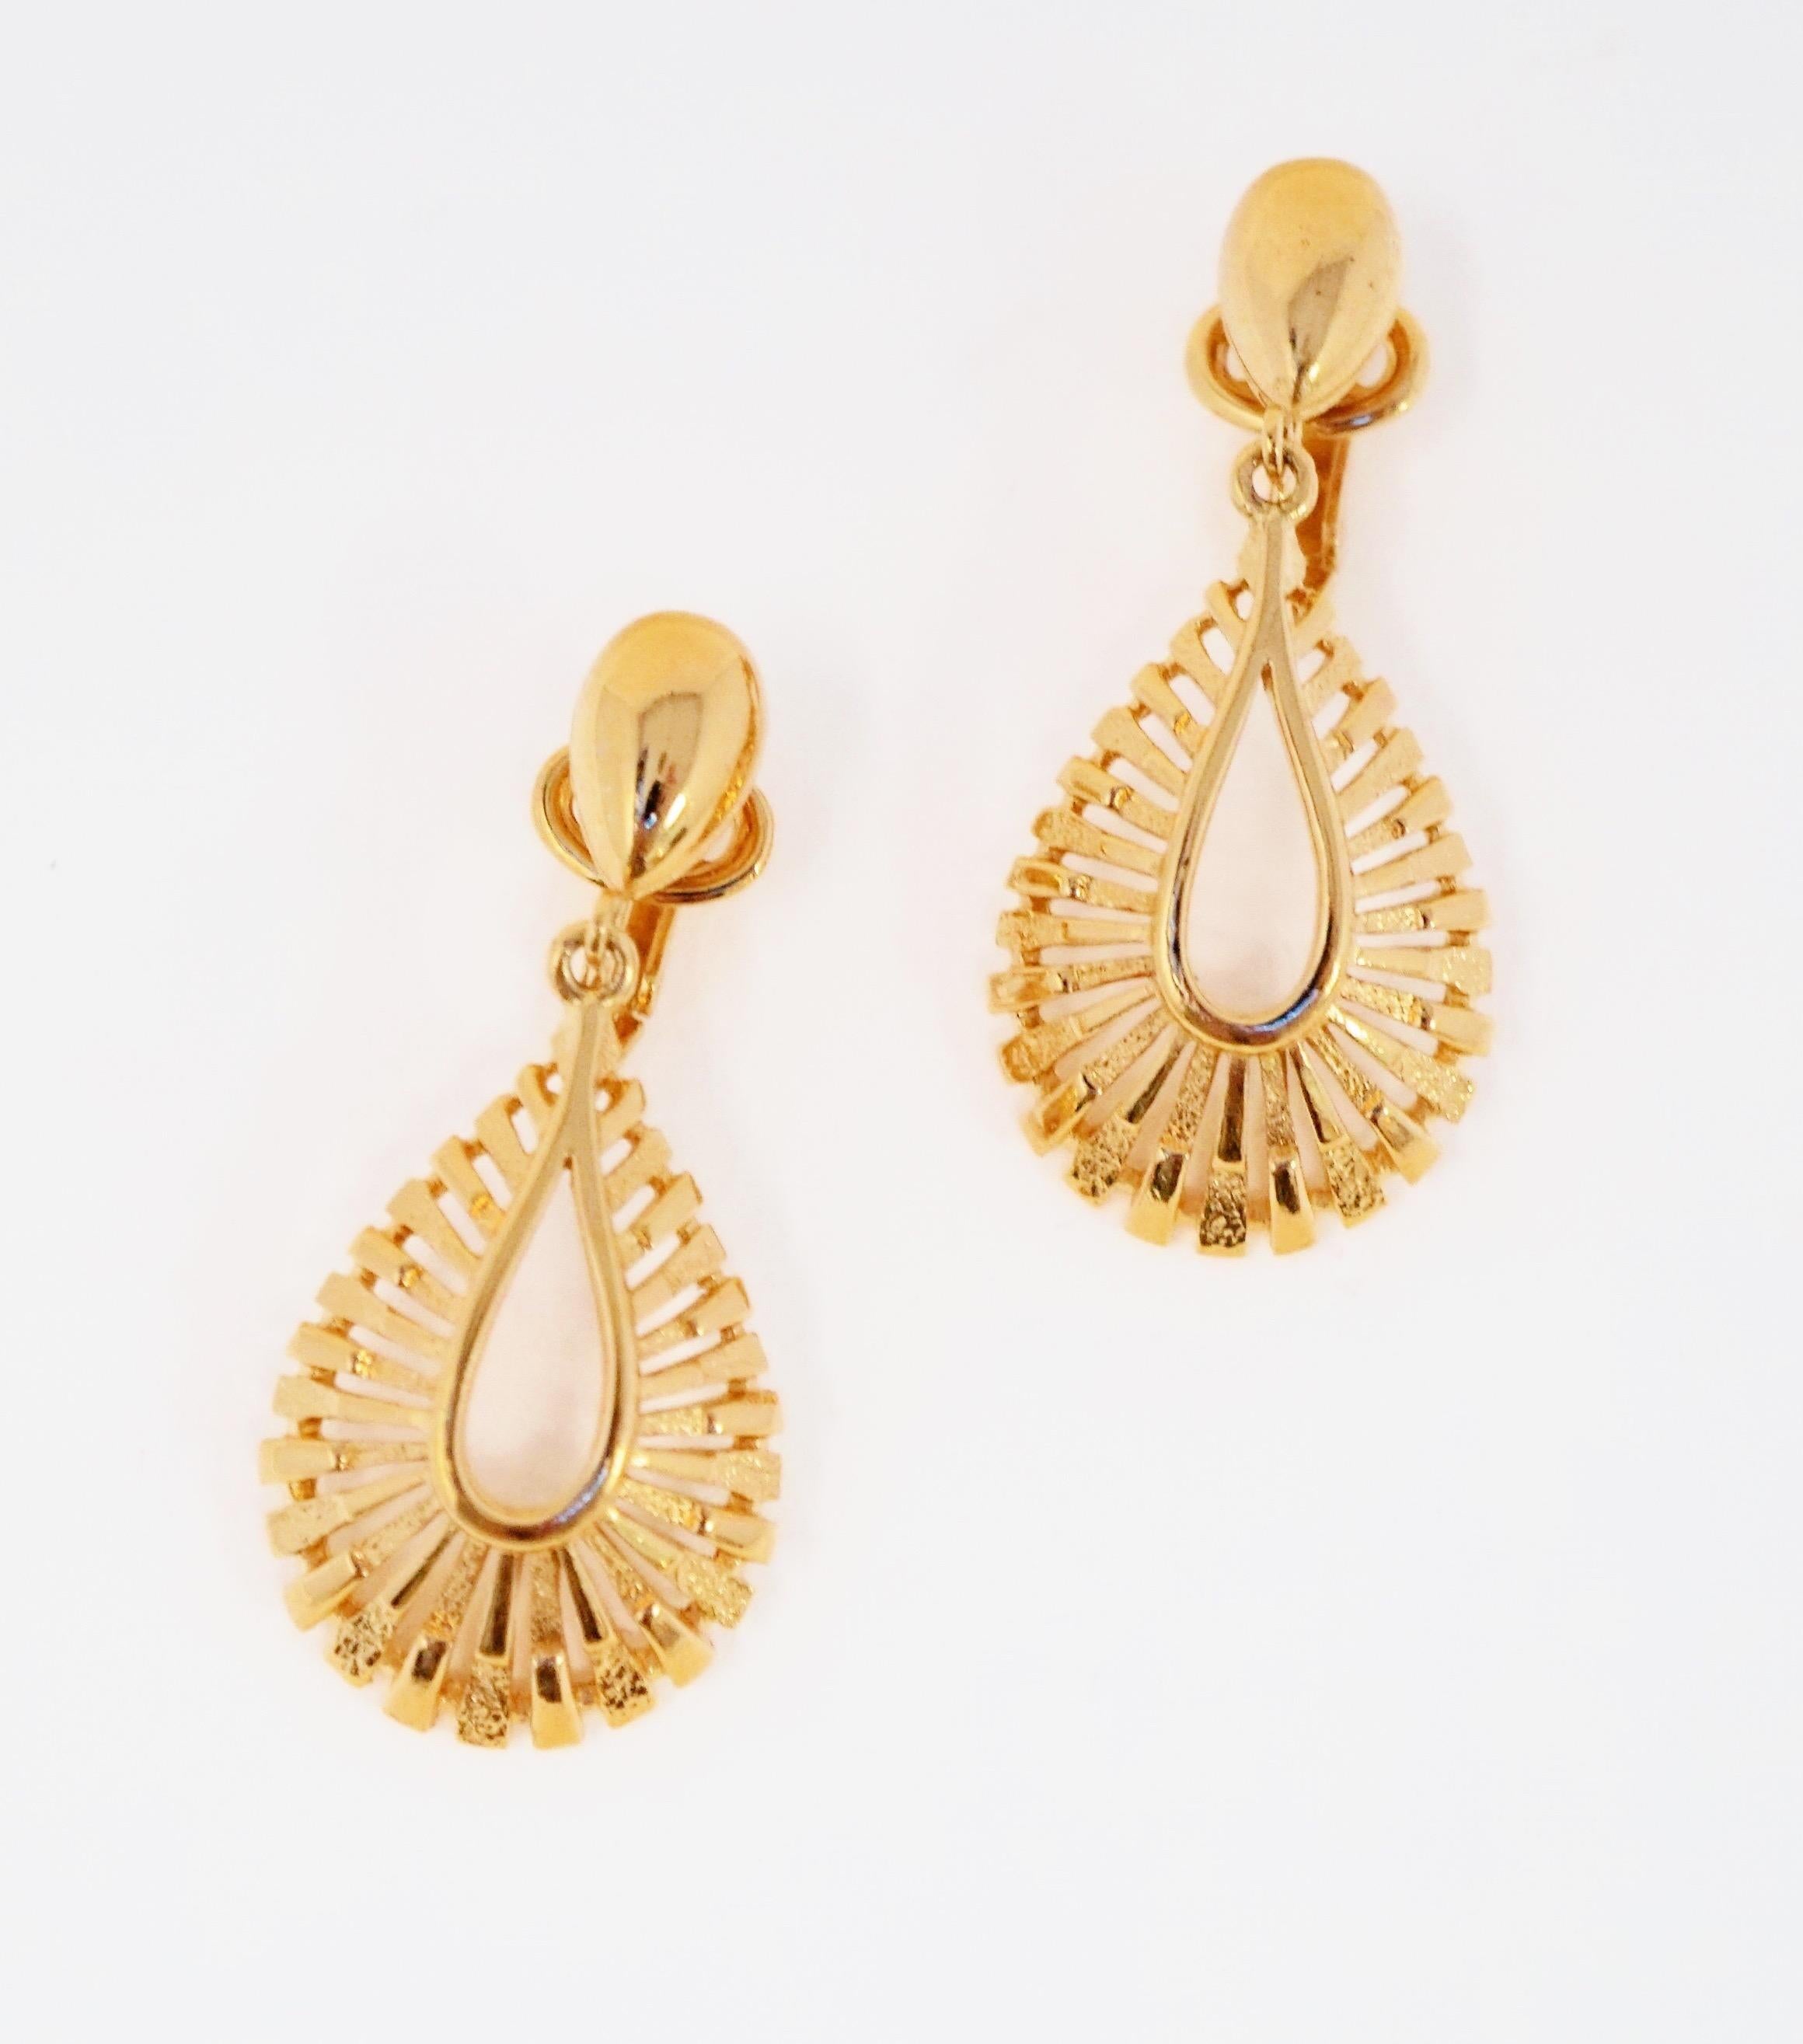 Stunningly beautiful Modernist gold-tone sunburst style clip-on dangle earrings by Trifari, circa 1955. Trifari is a highly collected costume jewelry brand, noted for it's high quality of construction and intricate details. This piece is signed on